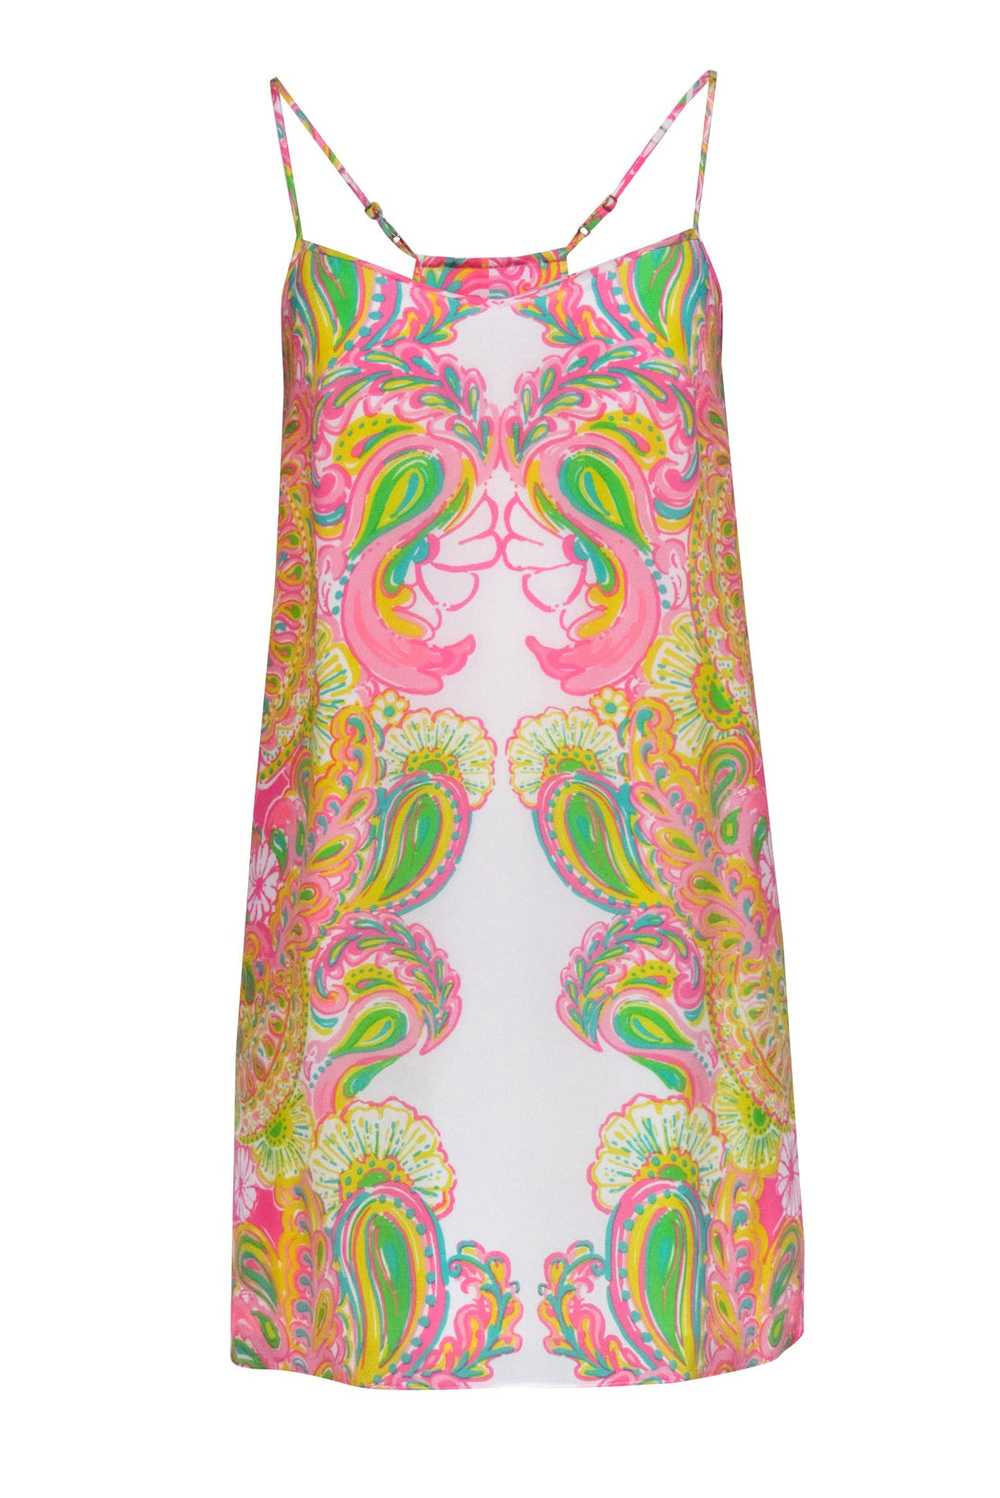 Lilly Pulitzer - Pink, White, & Yellow Paisley Pr… - image 1